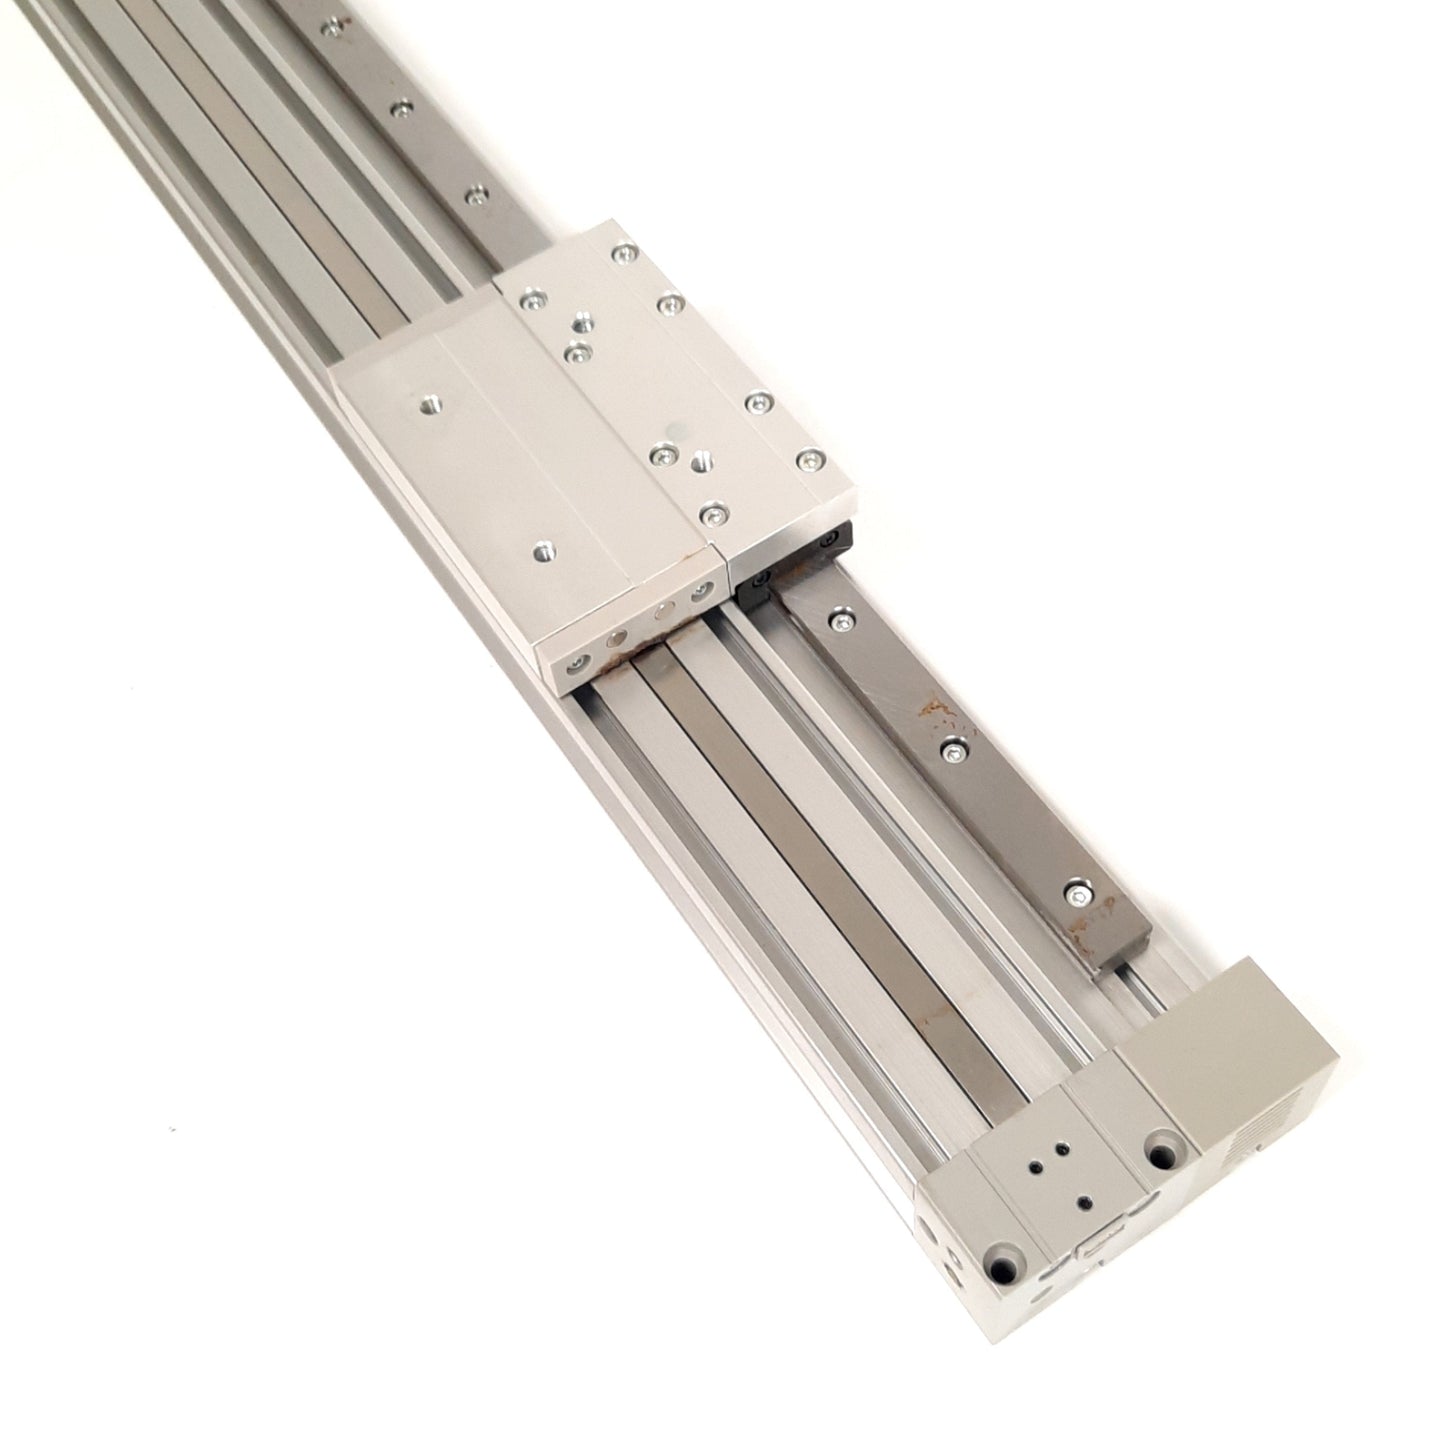 Used SMC MY1H20-800-XB11 Linear Guide Slide Table Bore: 20mm, Stroke: 800mm, M5 Ports